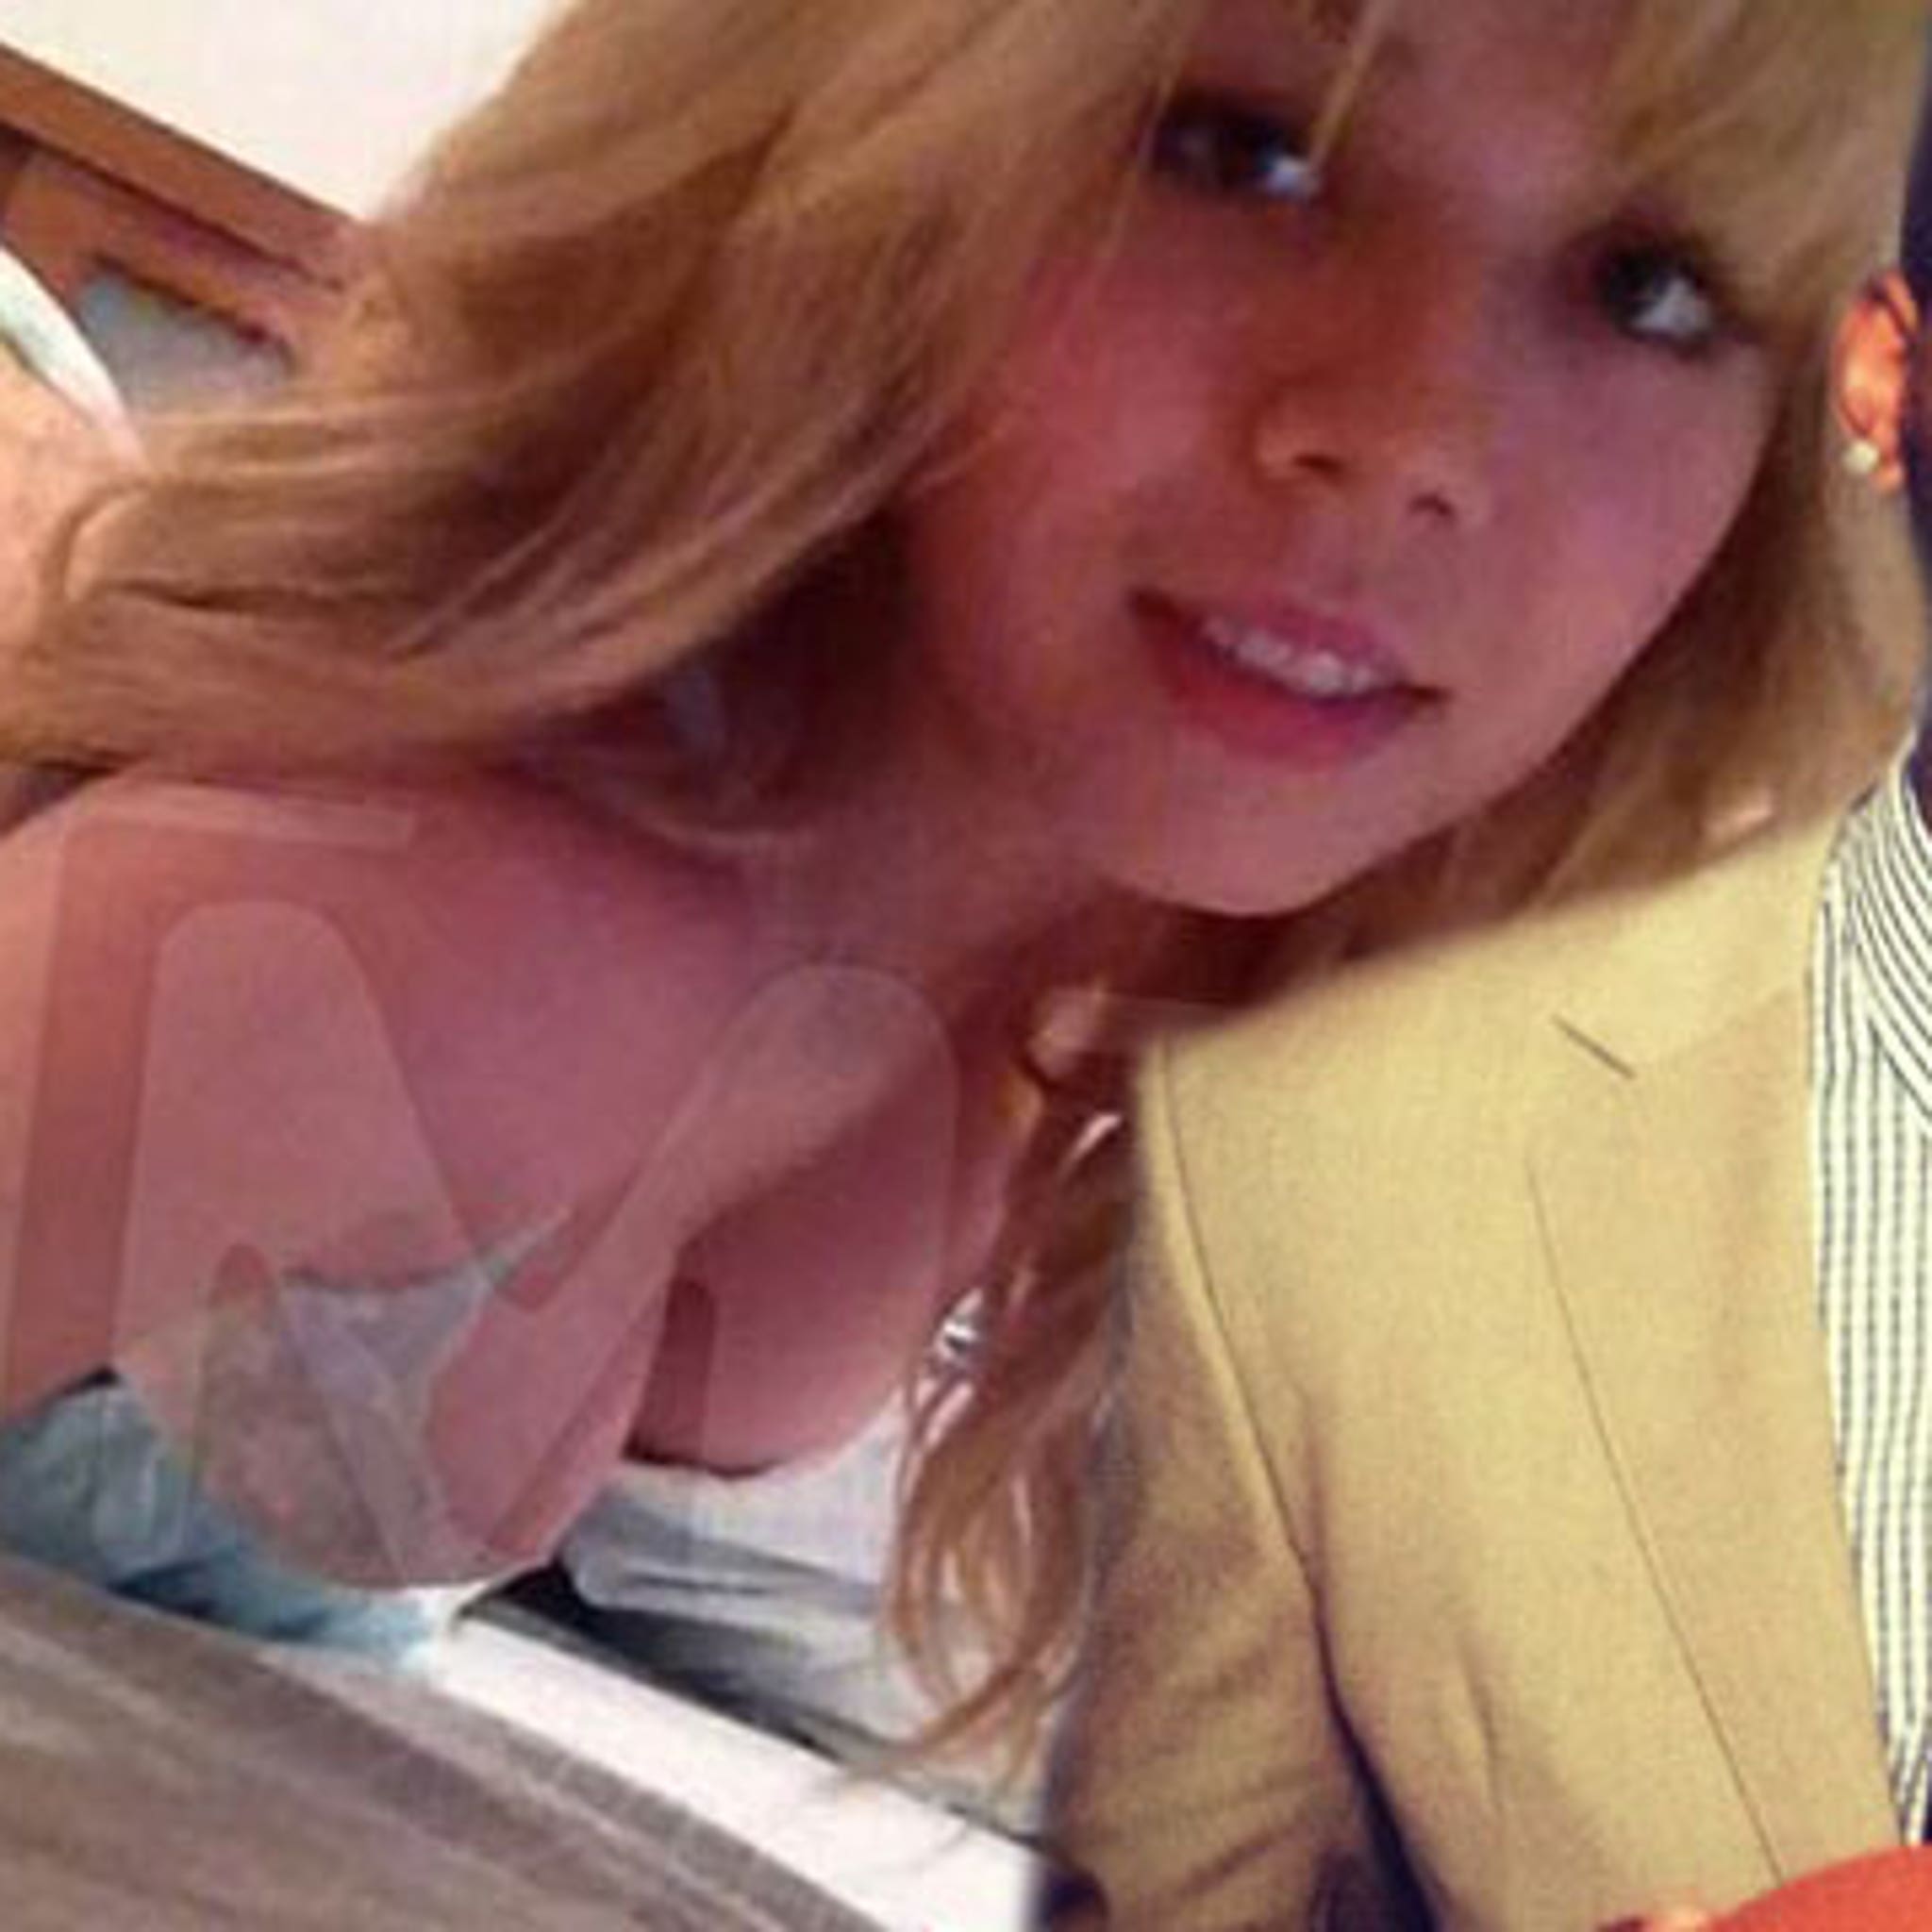 Photos of jennette mccurdy leaked Jennette McCurdy